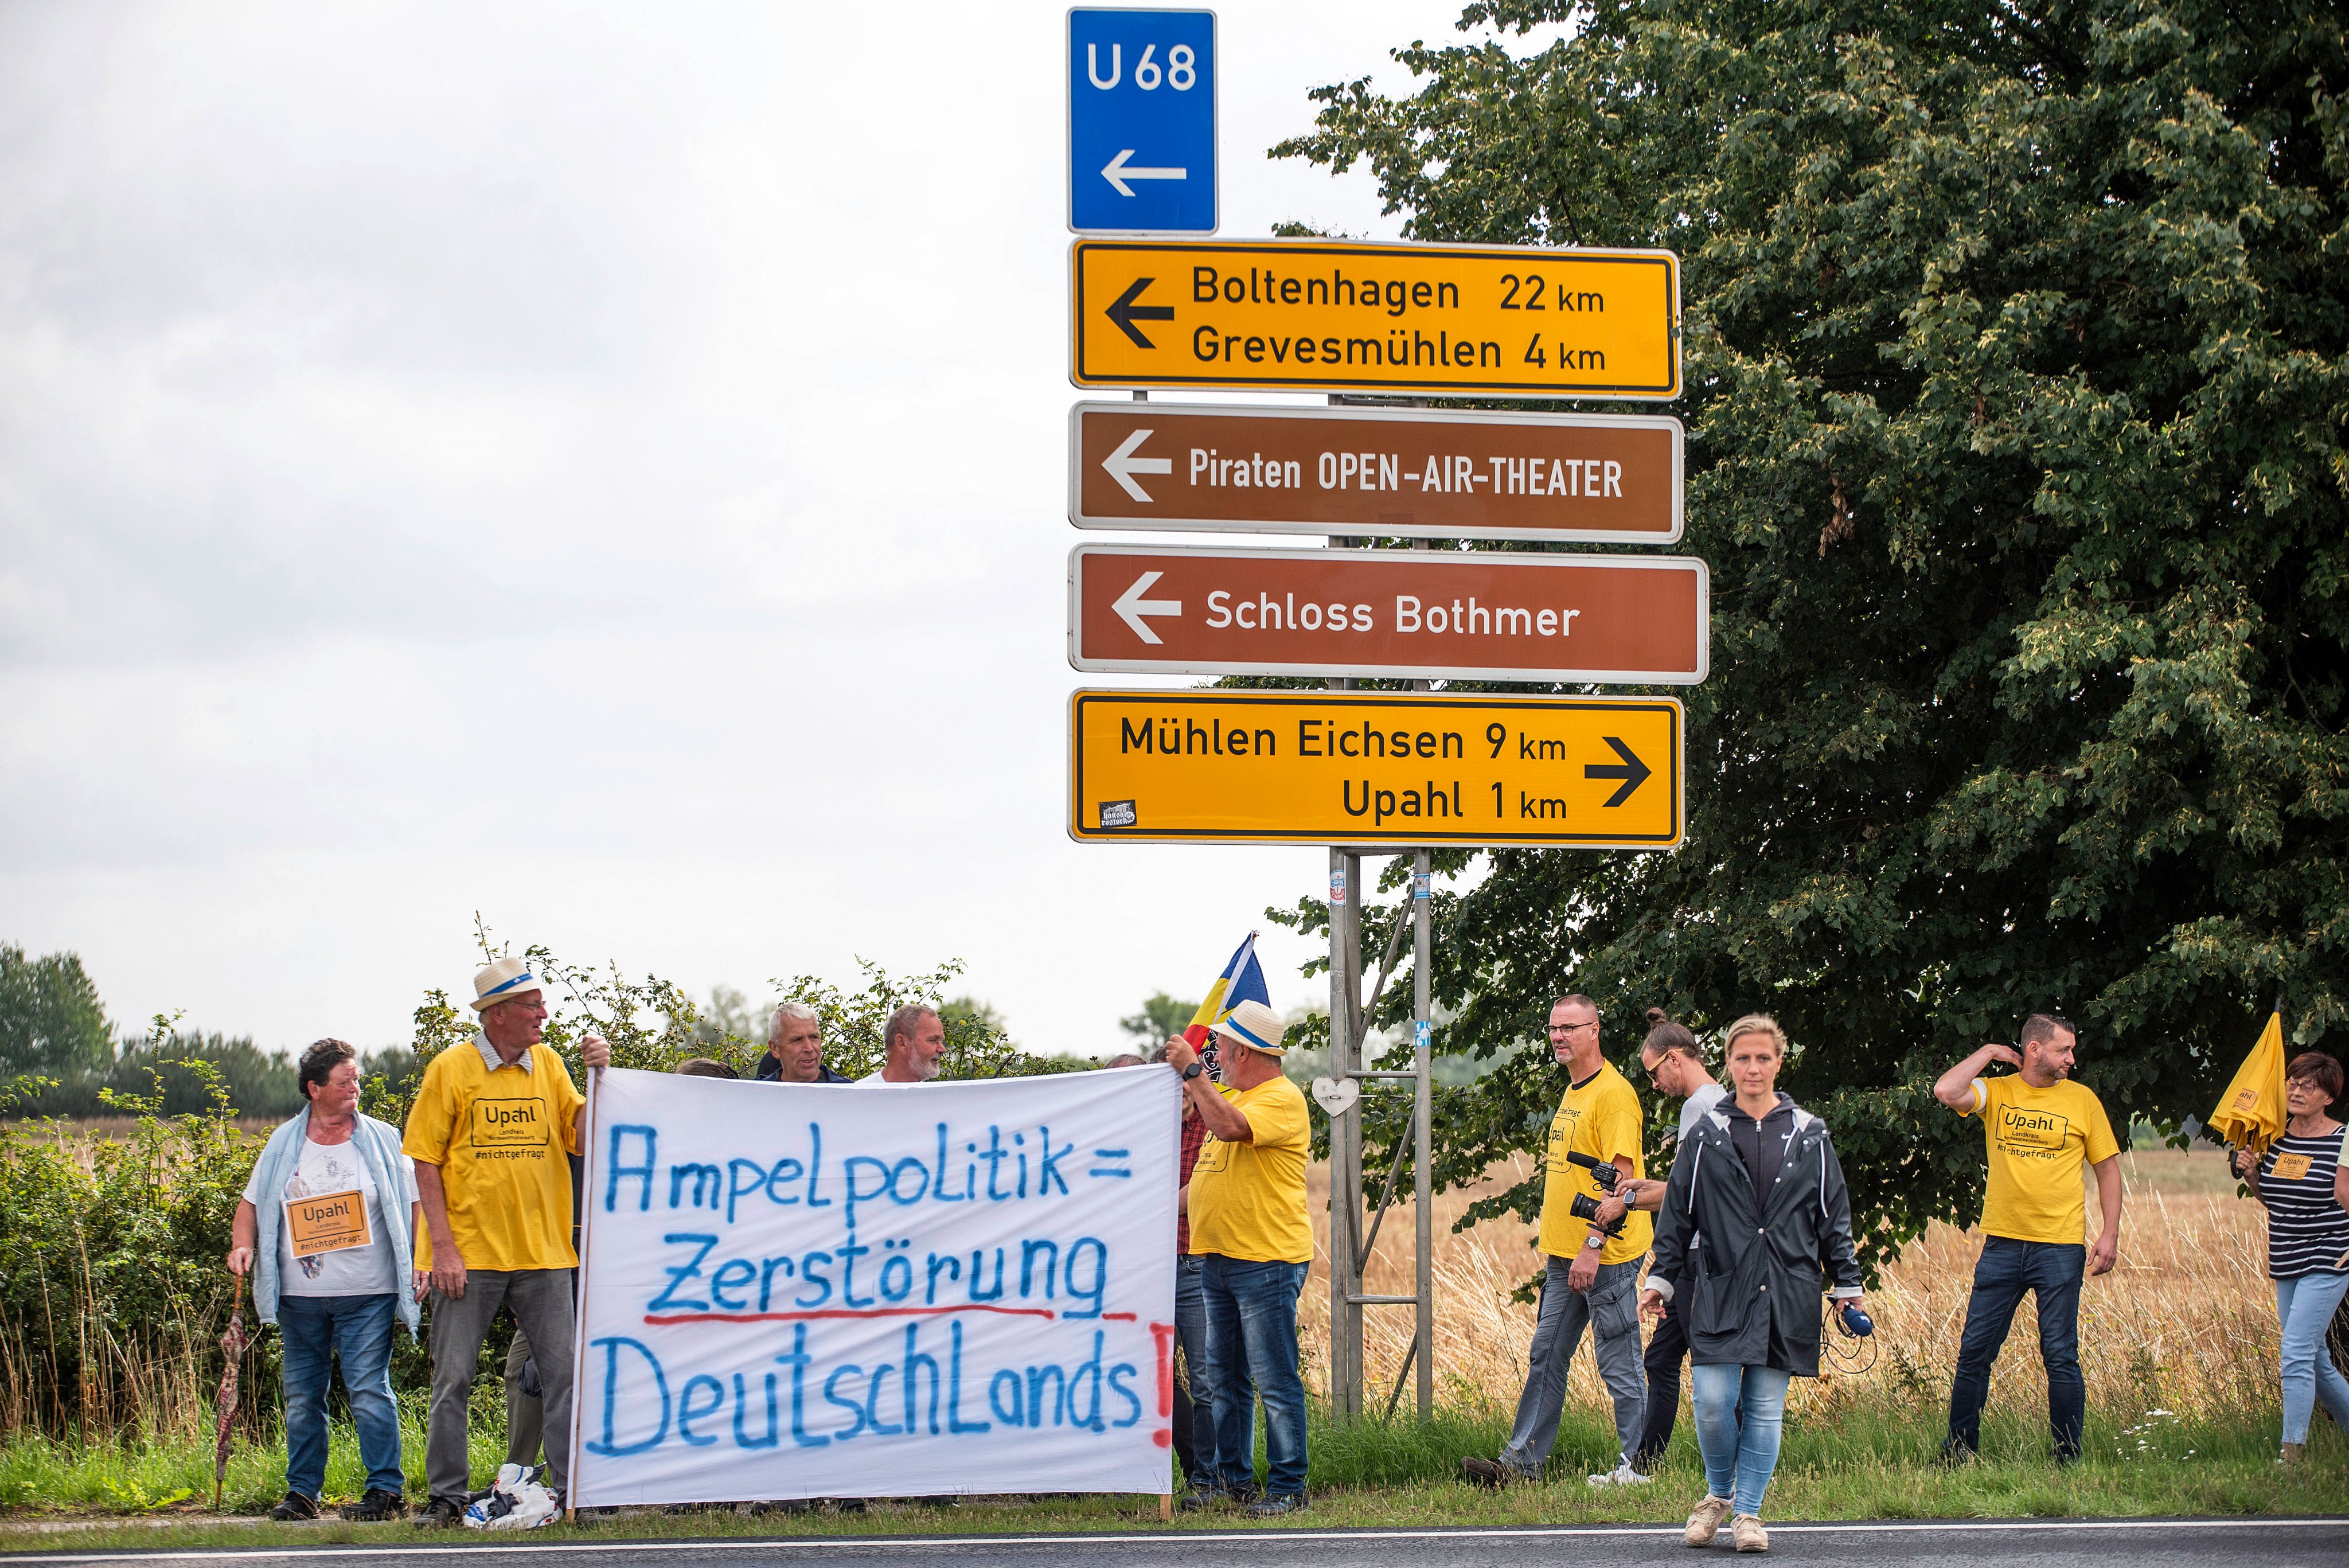 People gather for a protest march against the construction of a refugee shelter in Upahl, Germany, on July 29. The anti-immigrant sentiment in Germany is a marked change from 2016, when the country welcomed more than a million refugees fleeing the war in Syria and other conflicts. Photo: DPA